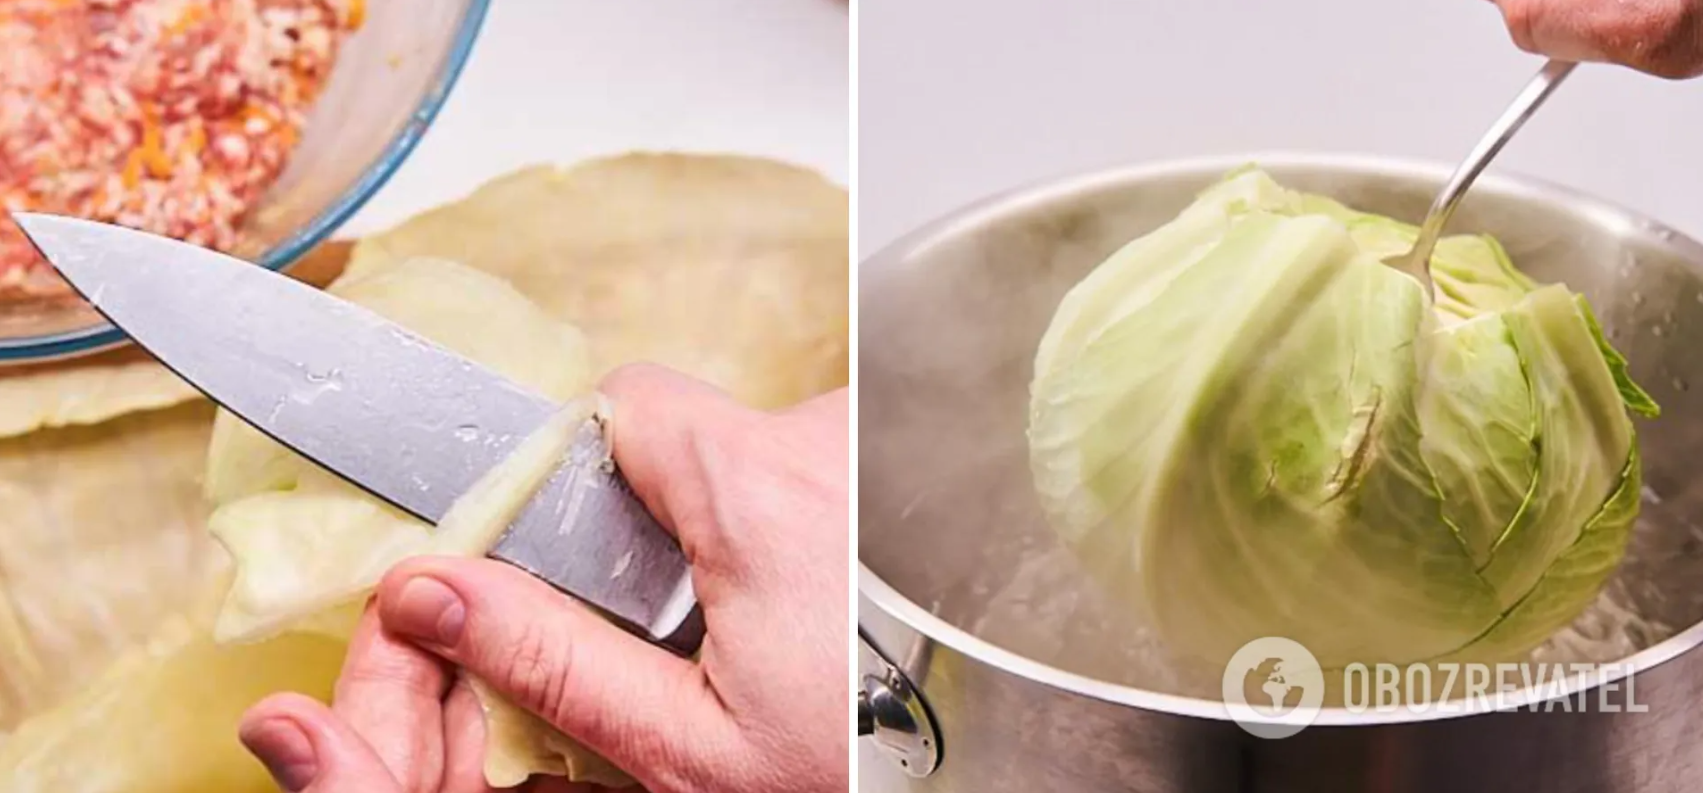 How to prepare cabbage for stuffed cabbage